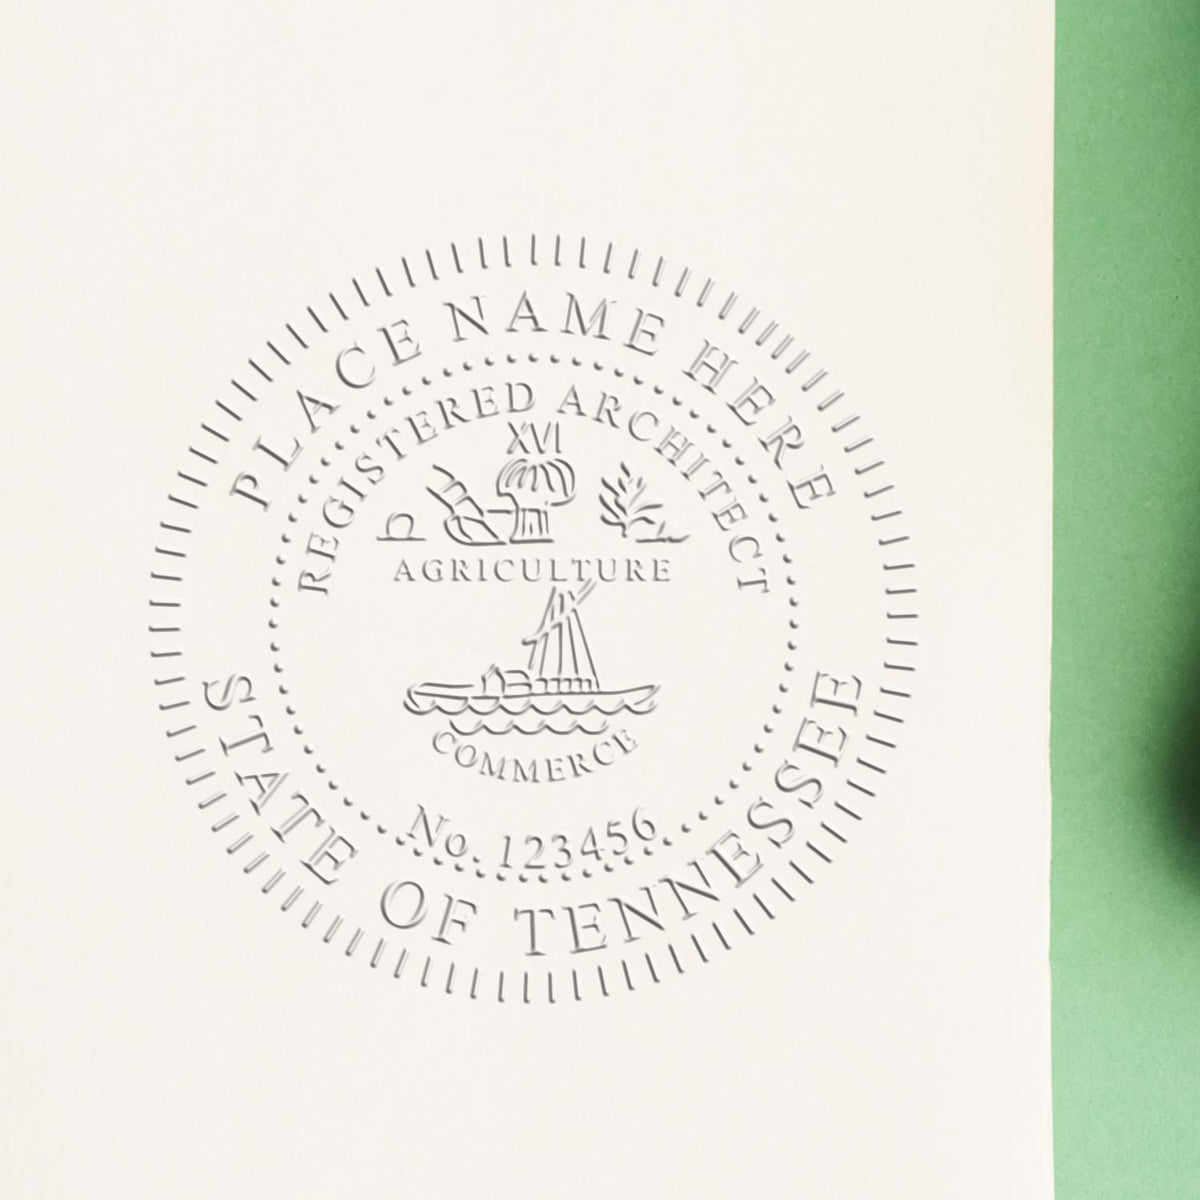 The State of Tennessee Long Reach Architectural Embossing Seal stamp impression comes to life with a crisp, detailed photo on paper - showcasing true professional quality.